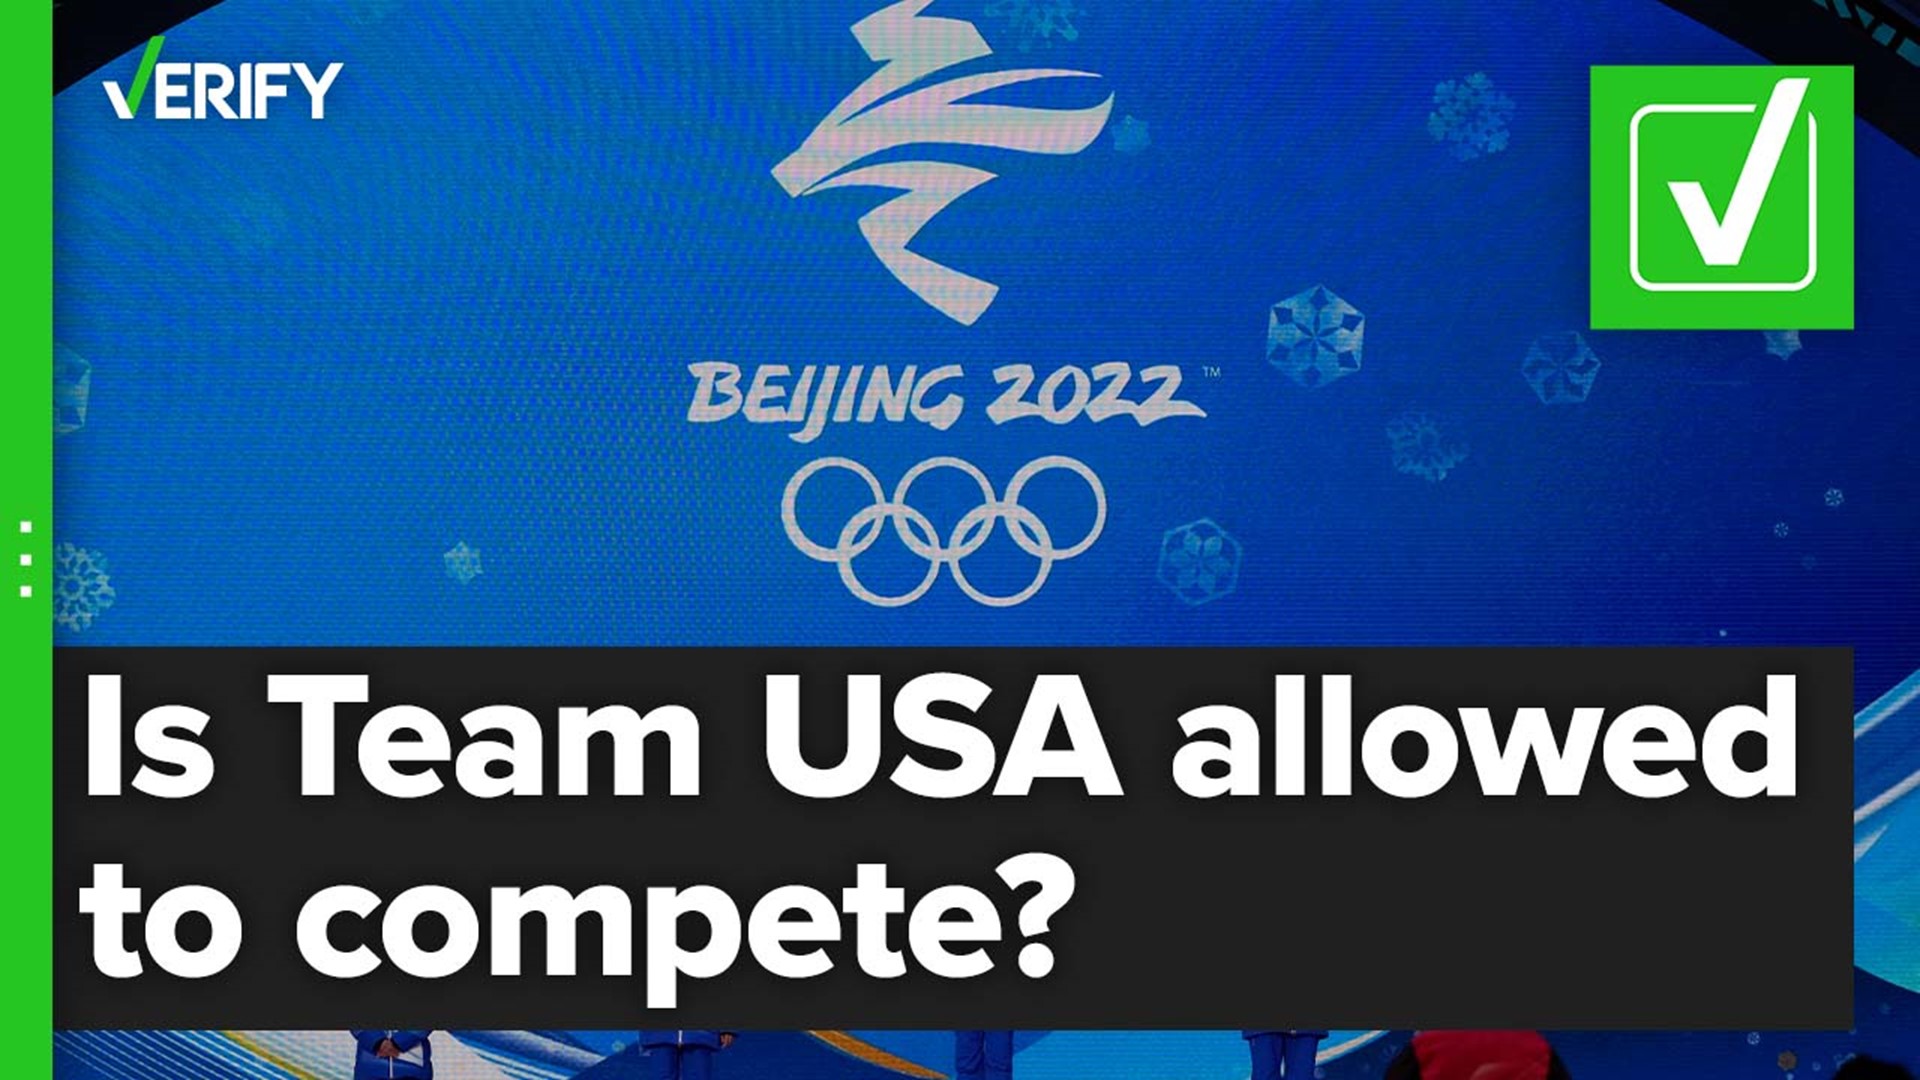 U.S. government officials will support Team USA from home.